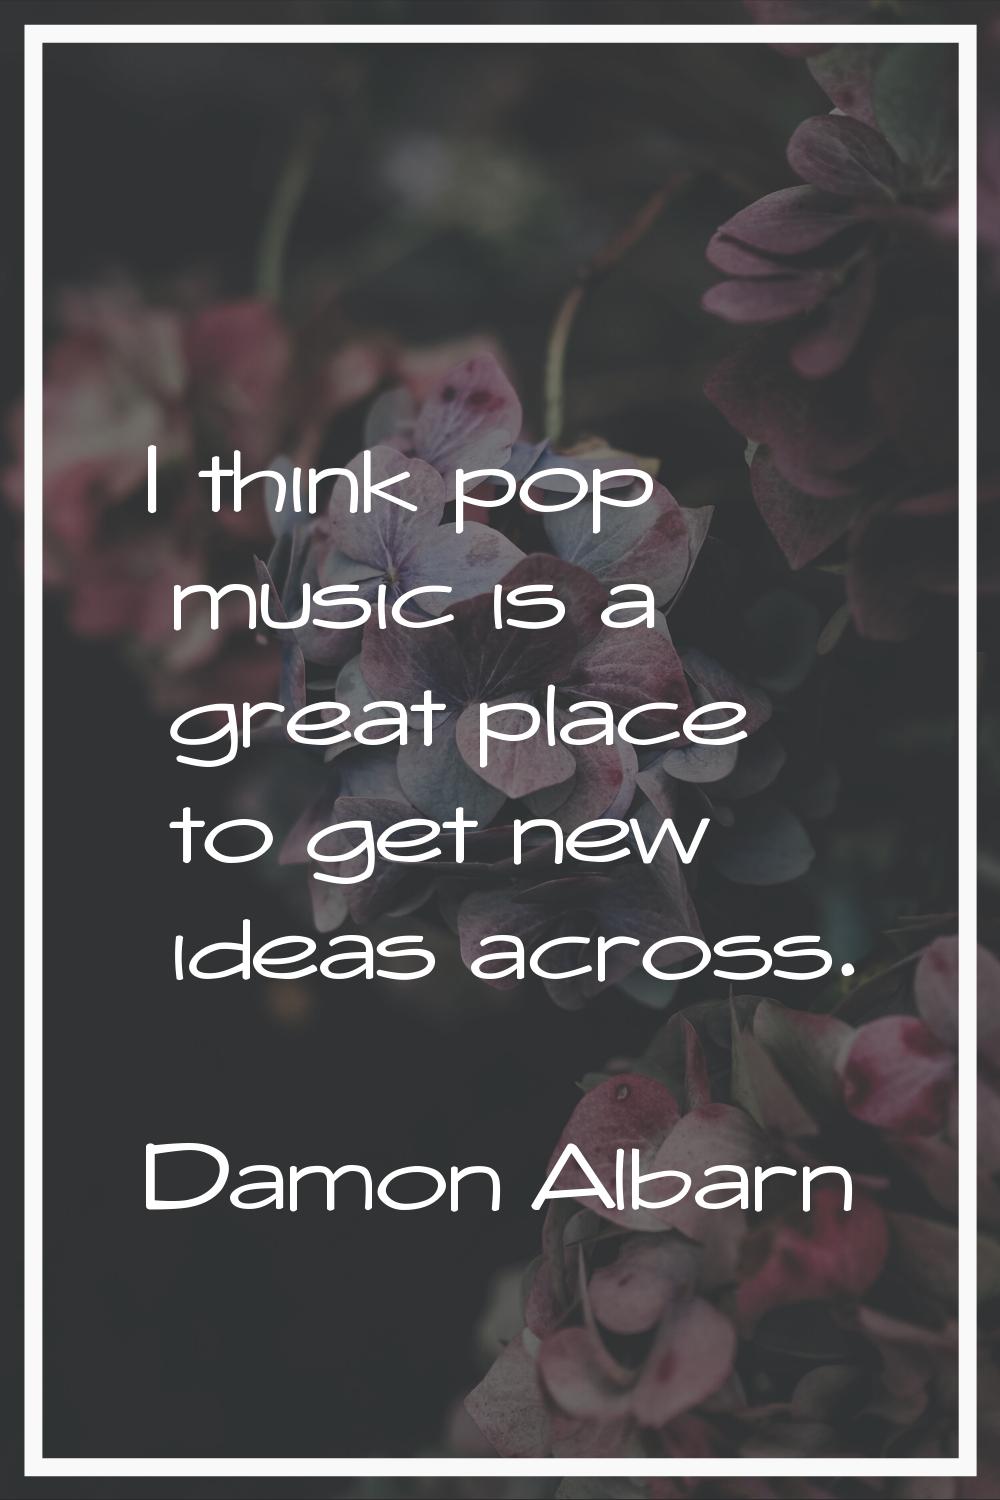 I think pop music is a great place to get new ideas across.